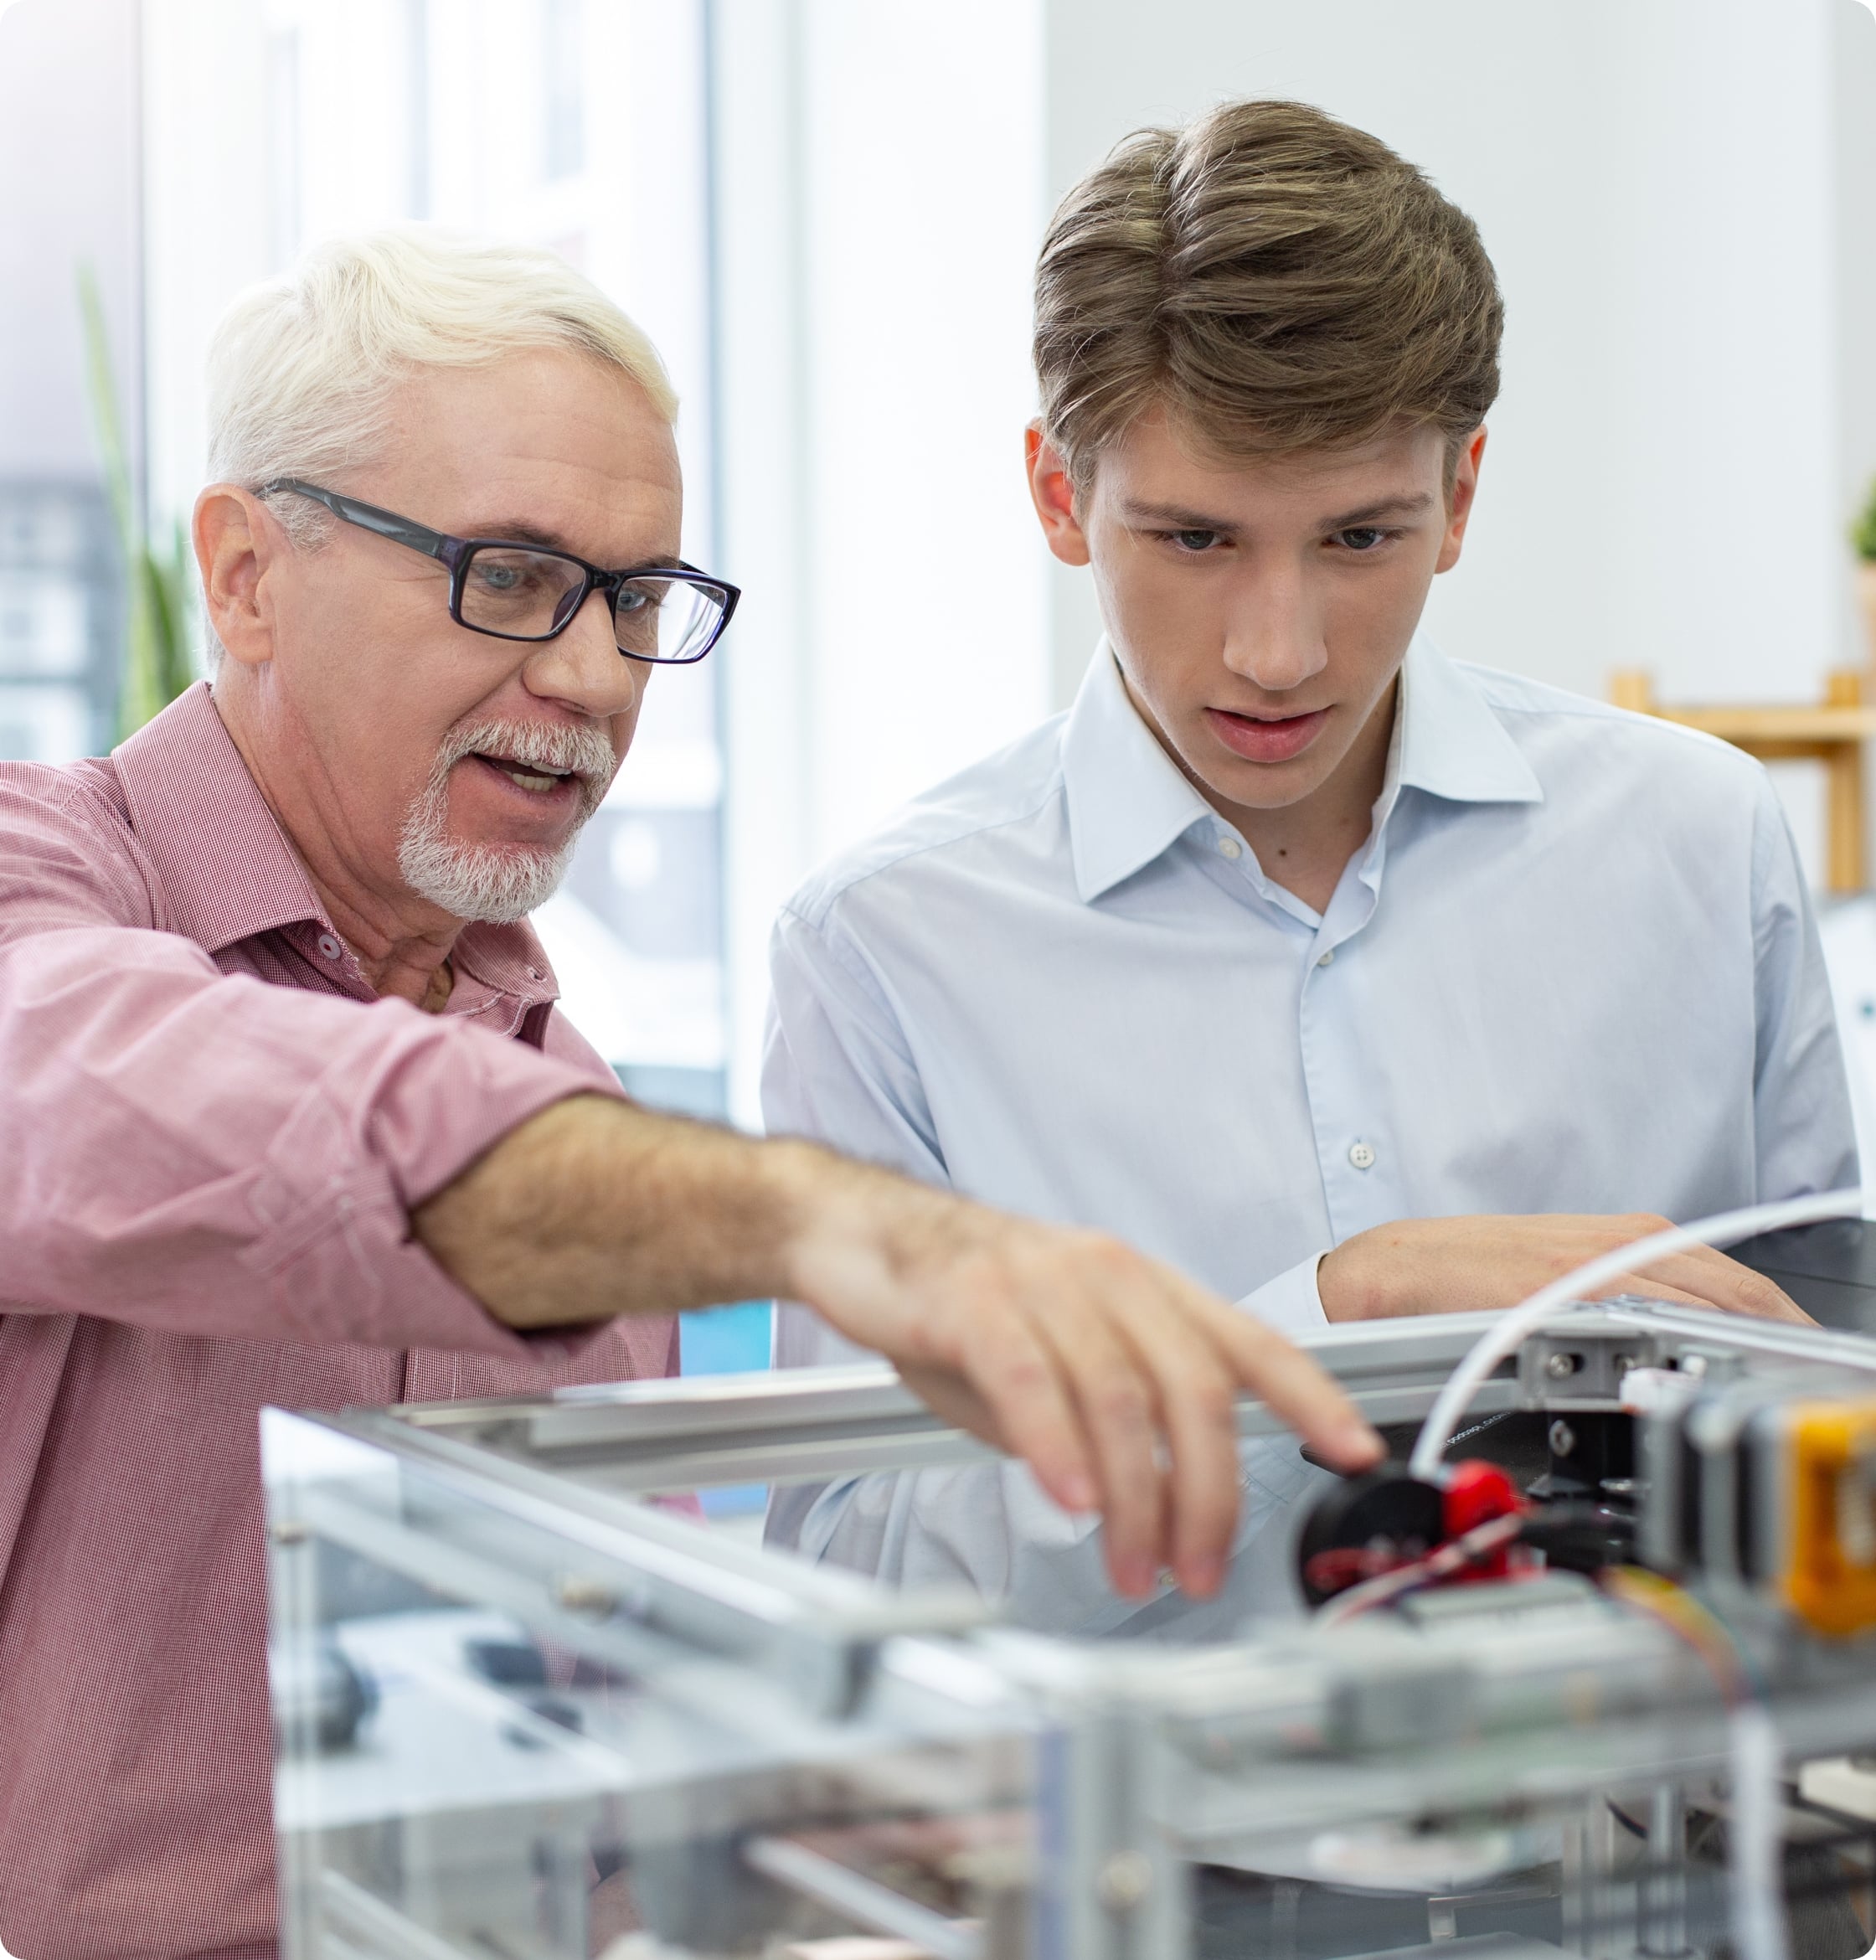 A older man showing a younger engineer a 3D printer